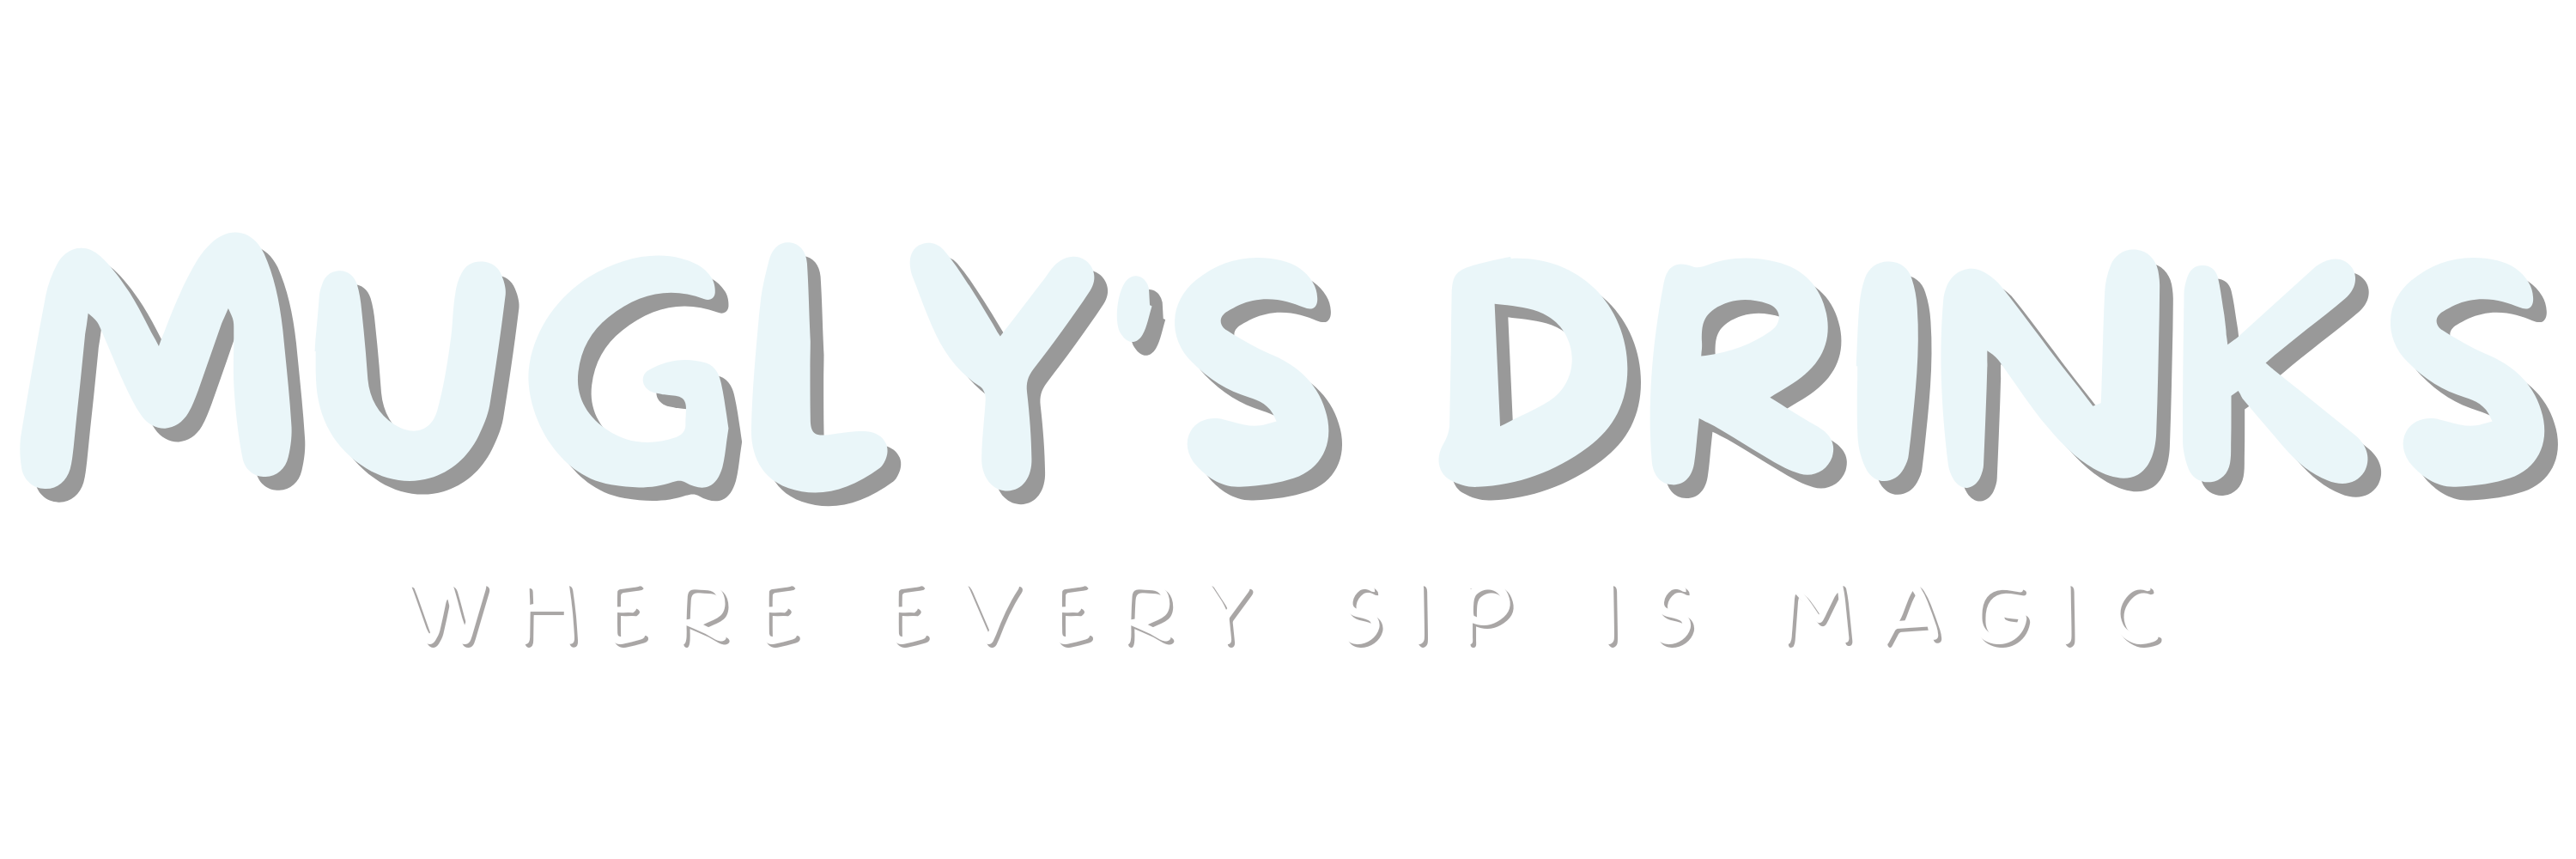 Mugly's Drinks